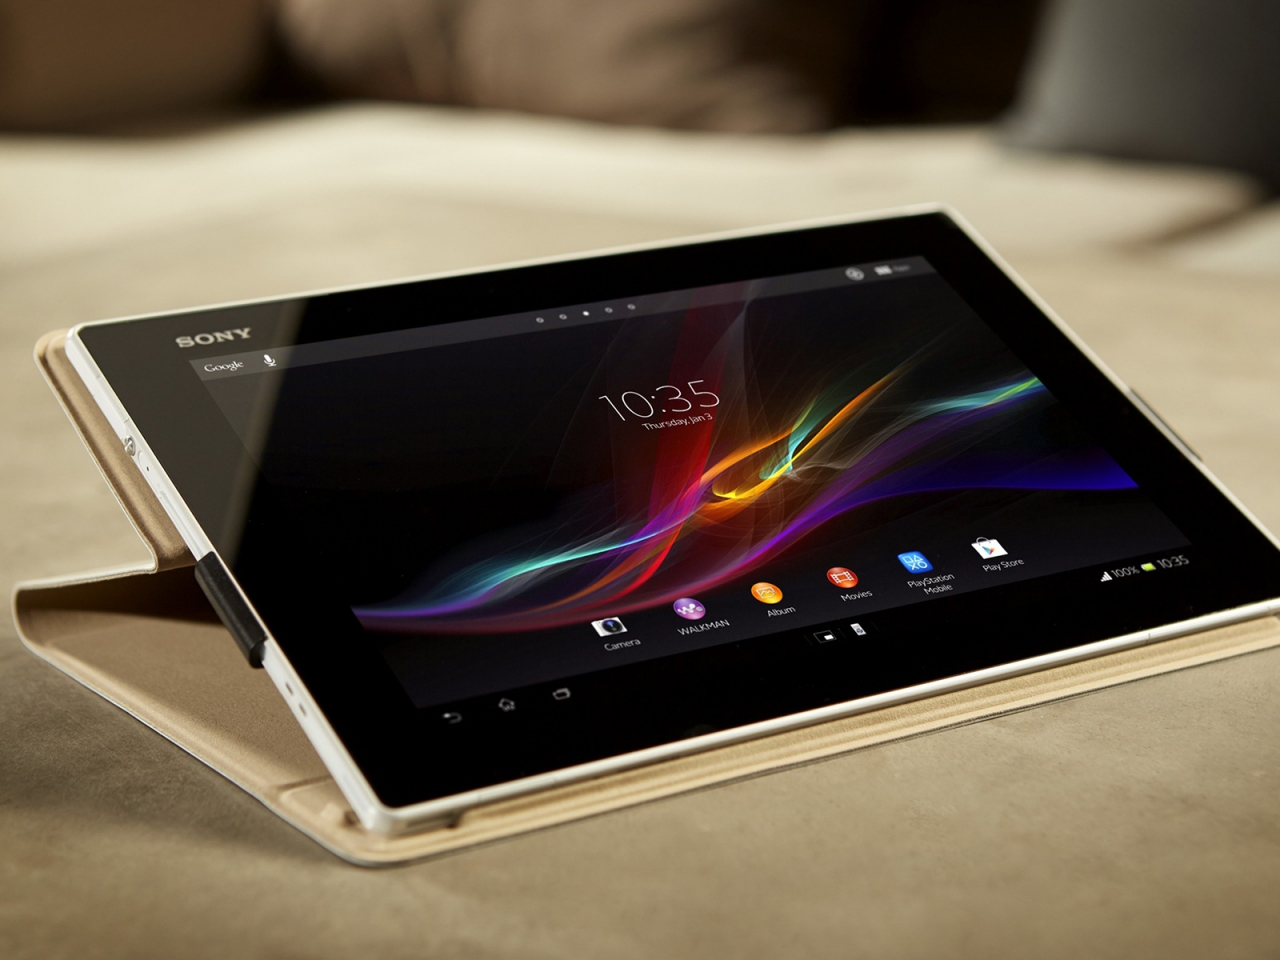 Sony Xperia Tablet Z for 1280 x 960 resolution